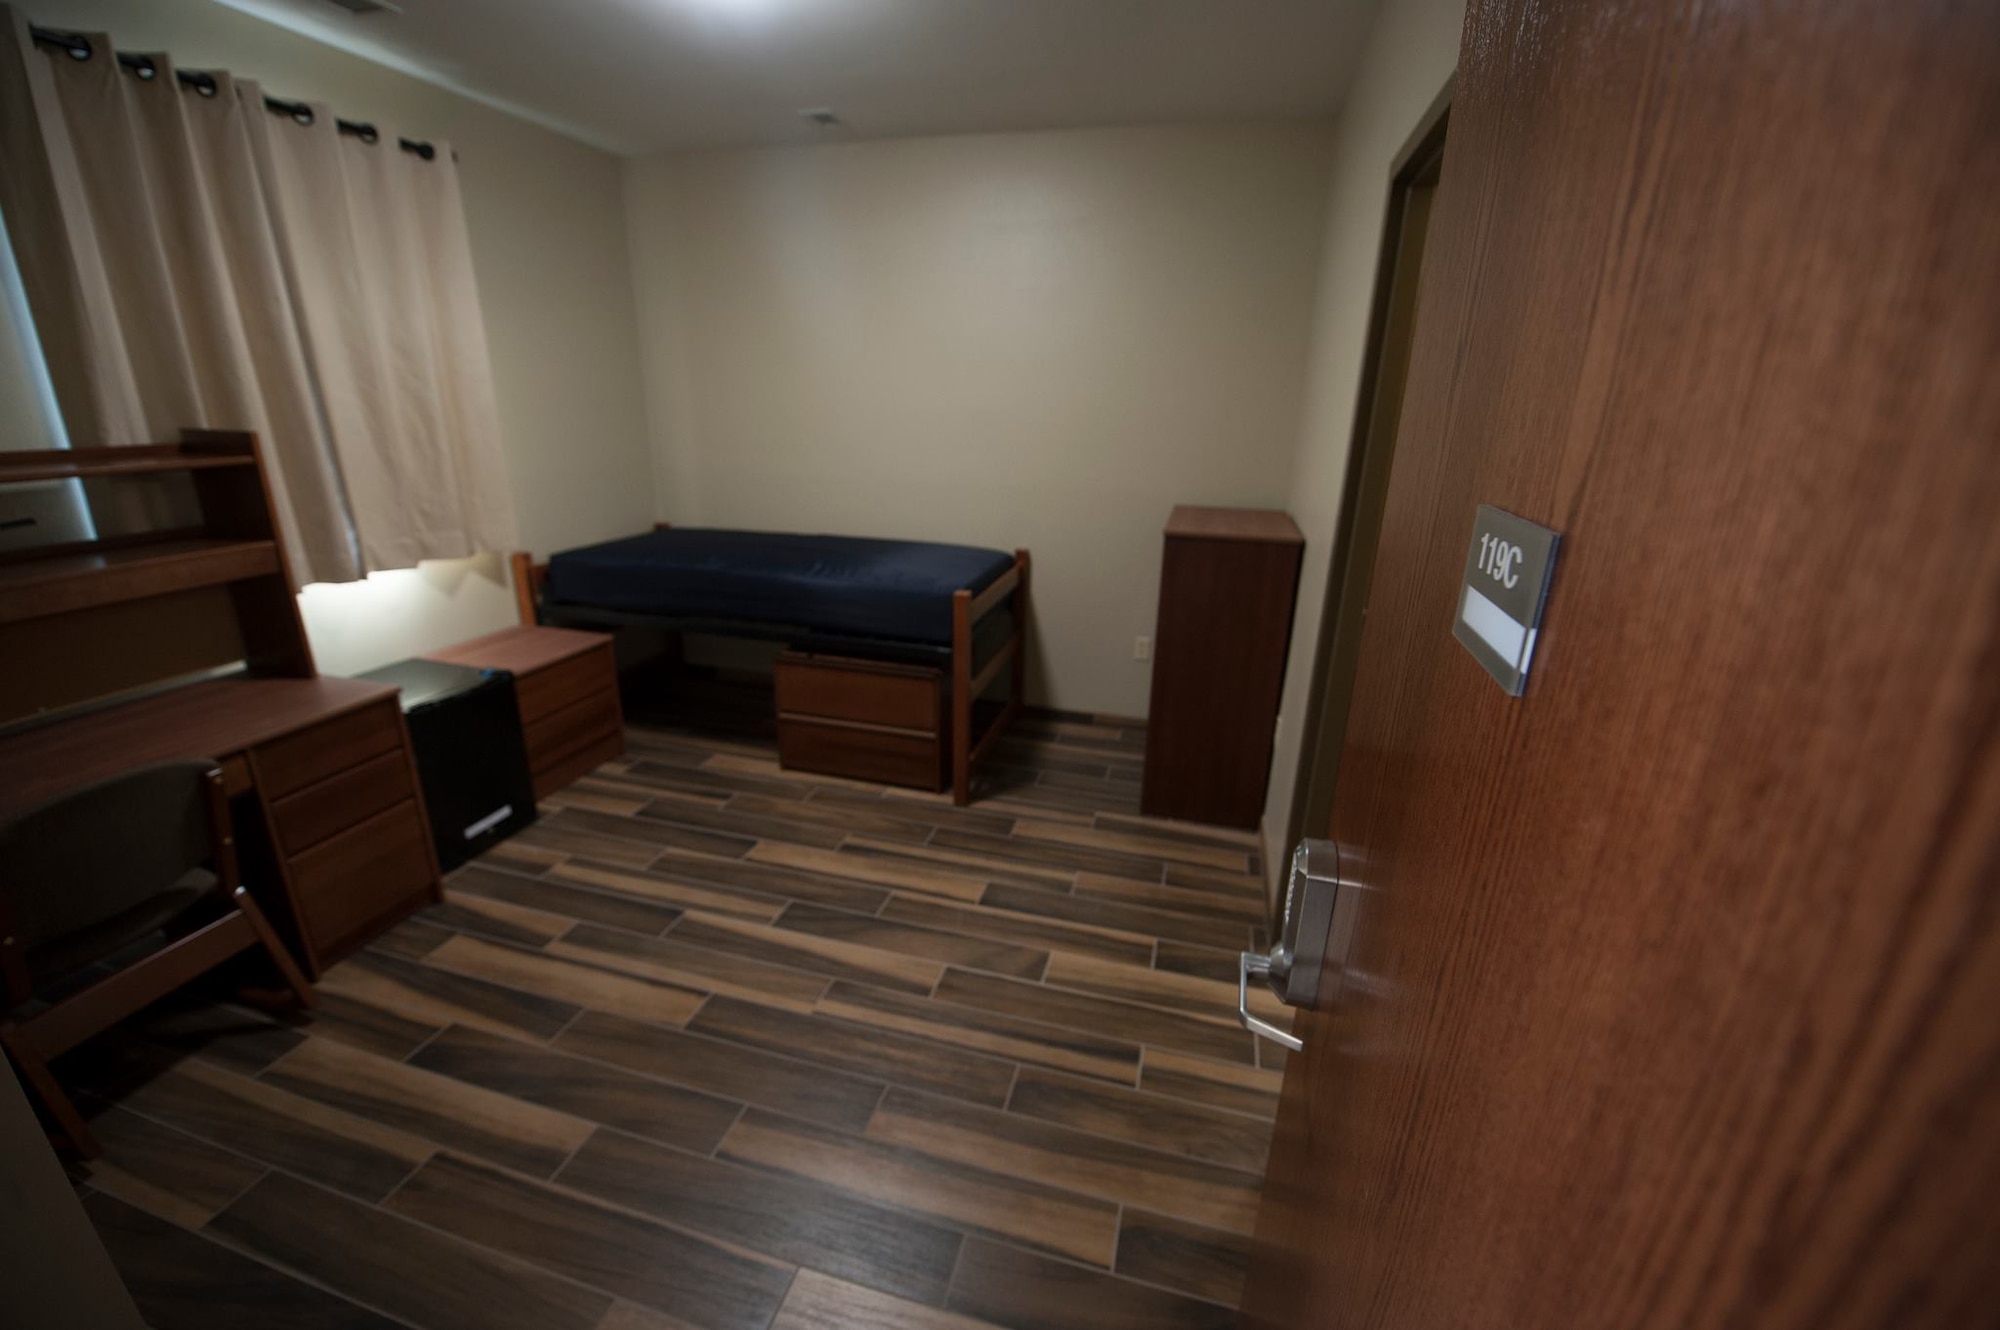 A dormitory room in the new facility on Nellis Air Force Base, Nev., is displayed after a ribbon cutting ceremony, Feb. 3, 2017. The 240-person facility has approximately 85,000 gross square feet with 60 four-bedroom/four-bathroom living unit modules. (U.S. Air Force photo by Airman 1st Class Kevin Tanenbaum/Released)